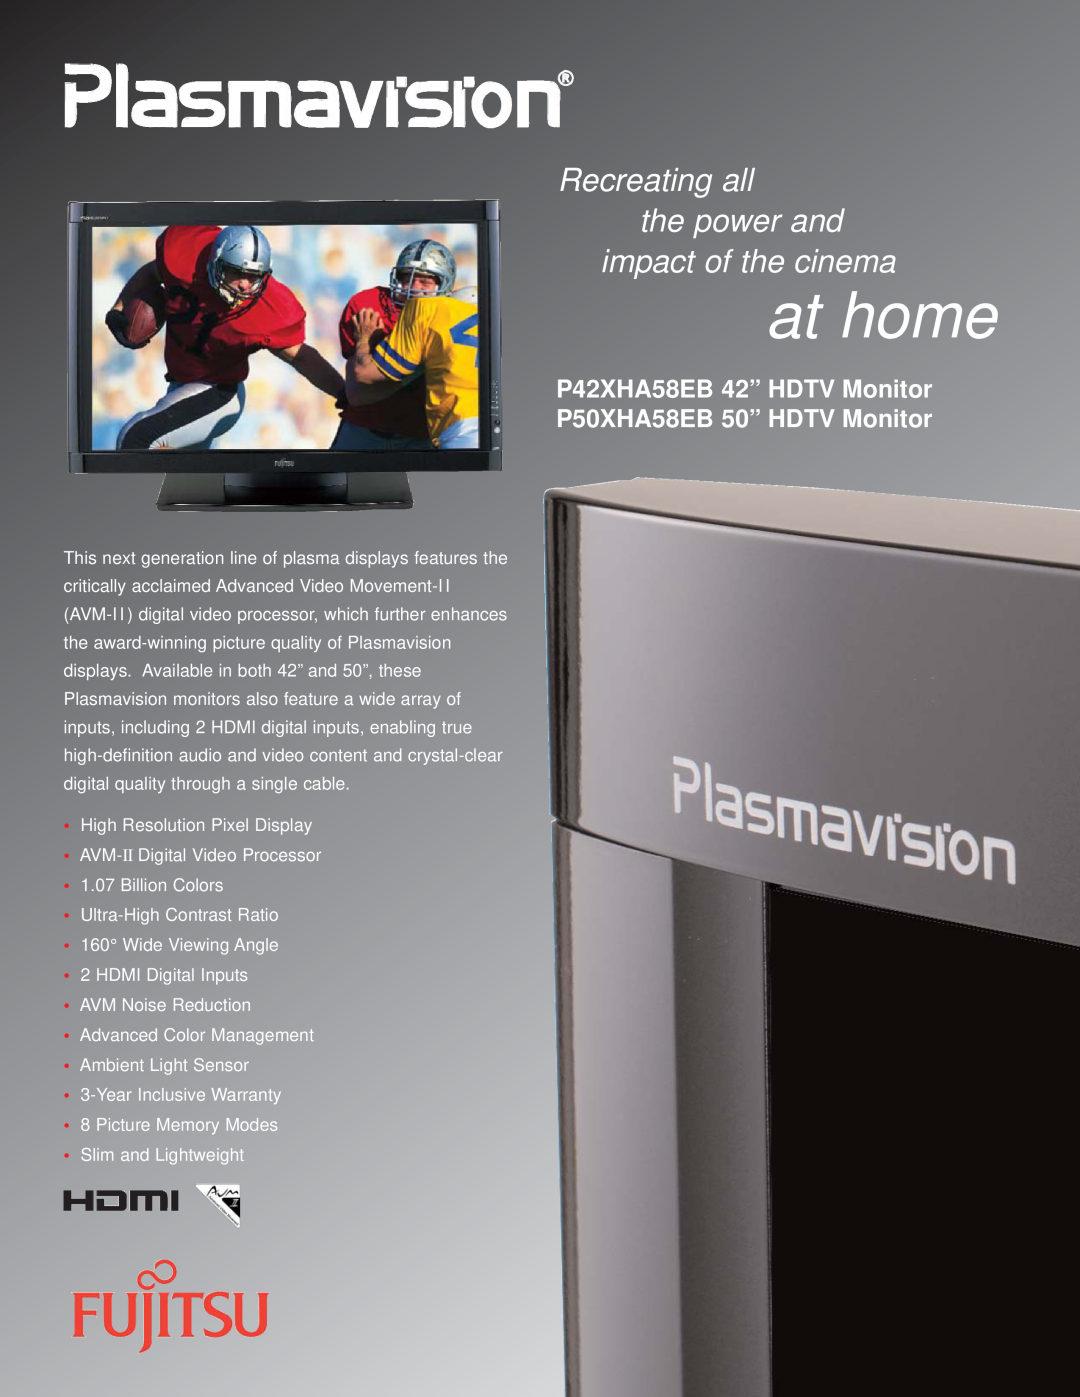 Fujitsu P50XHA58EB, P42XHA58EB specifications at home, Recreating all the power and impact of the cinema 